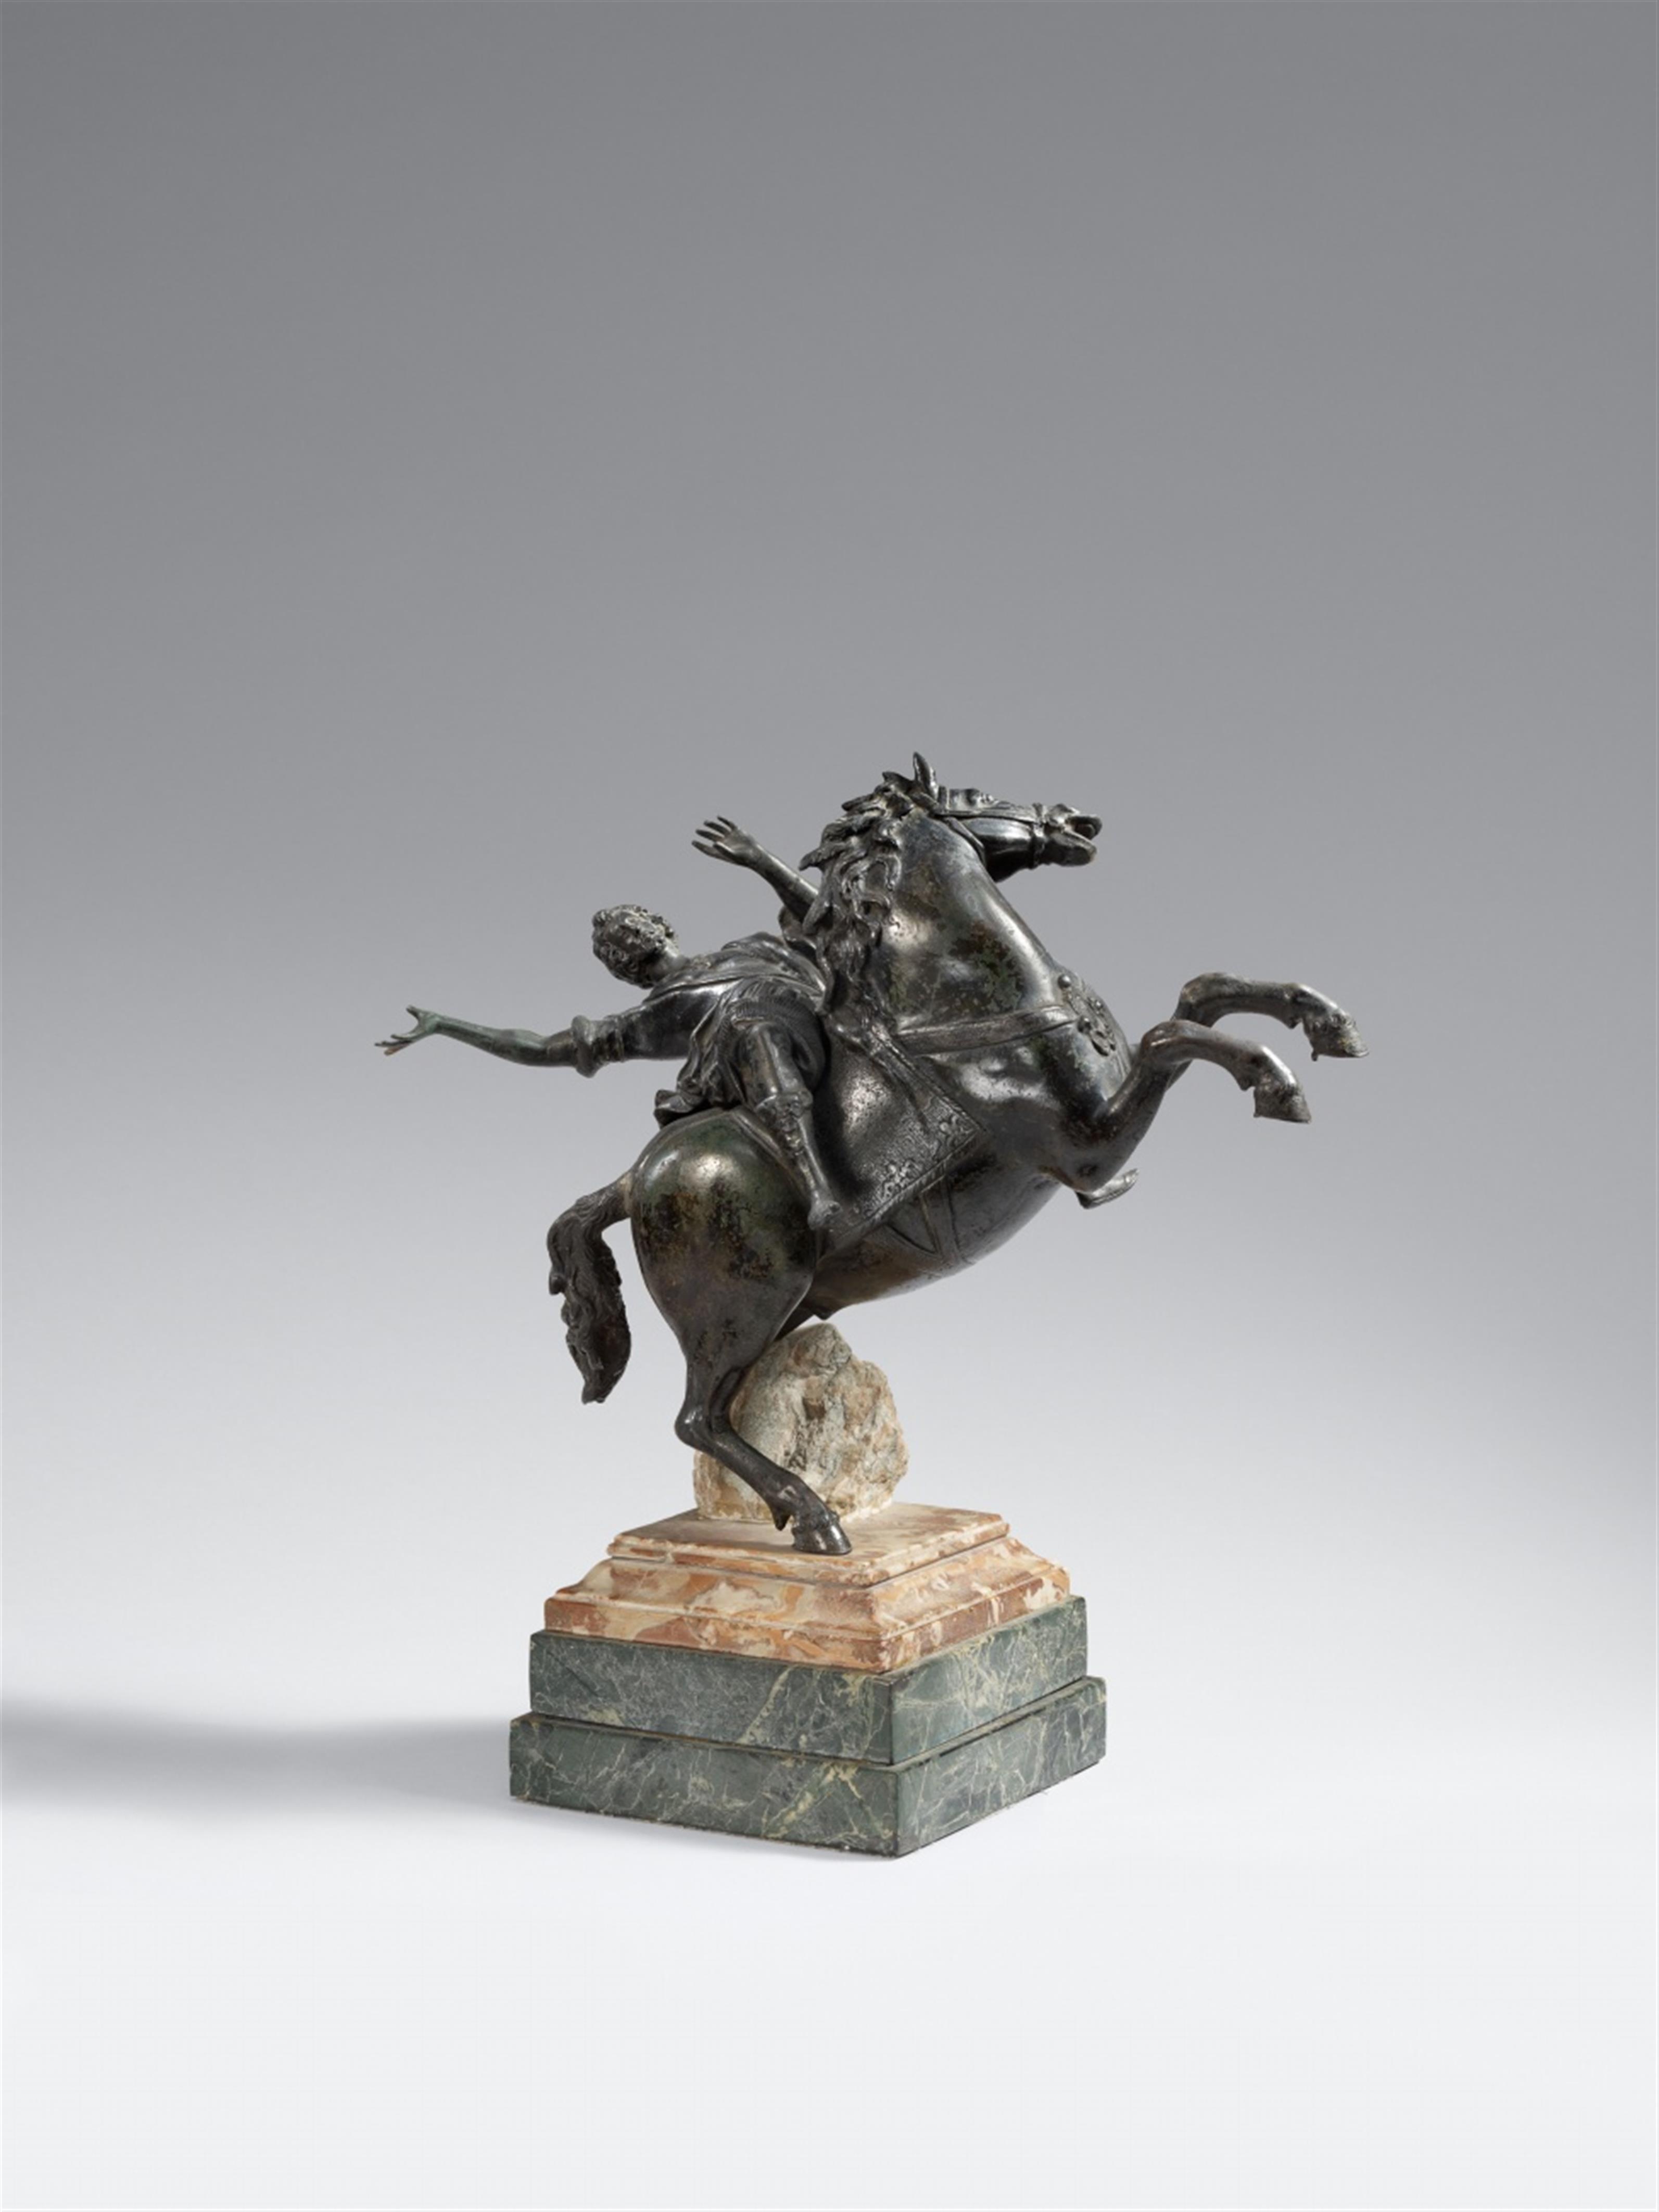 Northern Italy 17th century - A 17th century North Italian bronze figure depicting the conversion of St. Paul - image-1